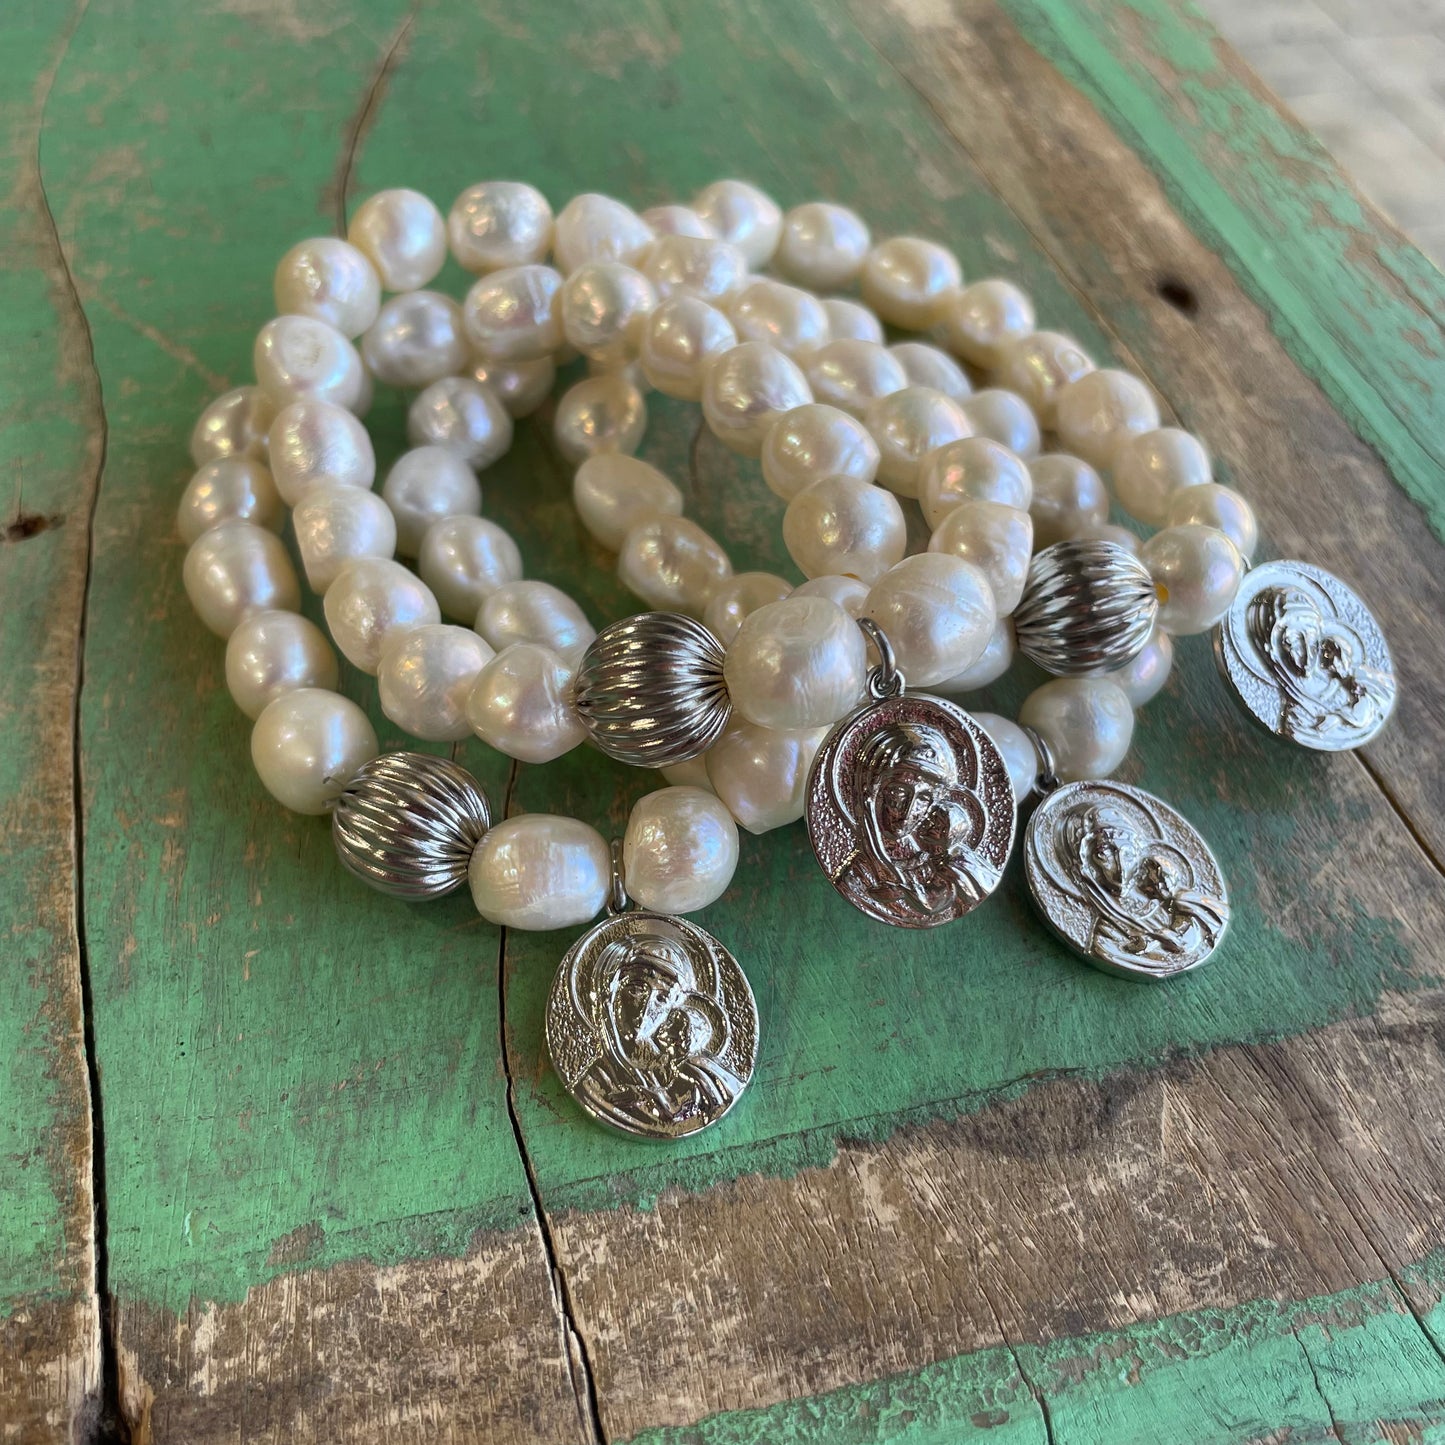 Our Lady of Good Counsel Pearl Bracelet